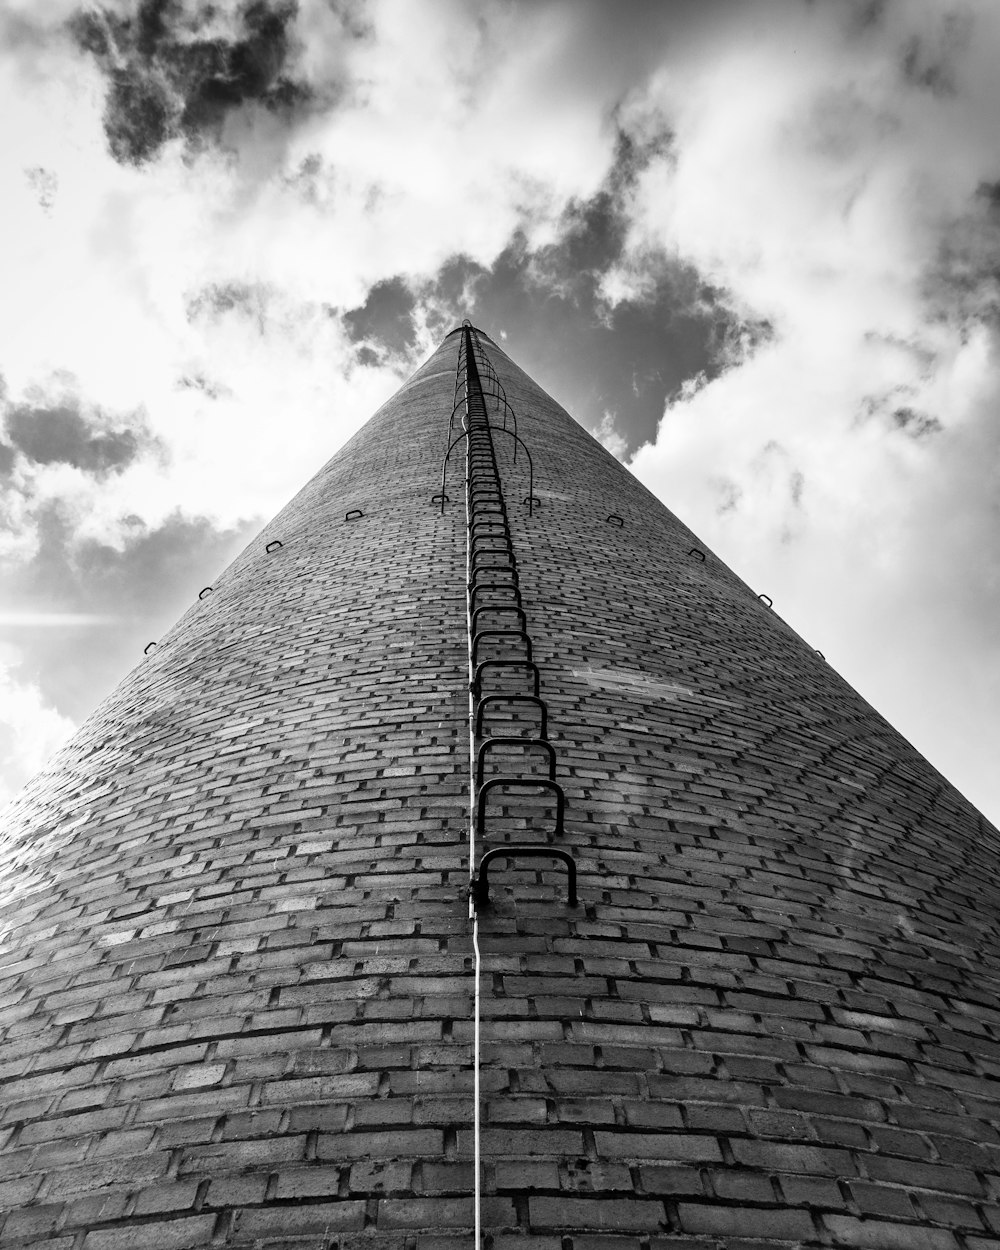 a black and white photo of a tall brick building